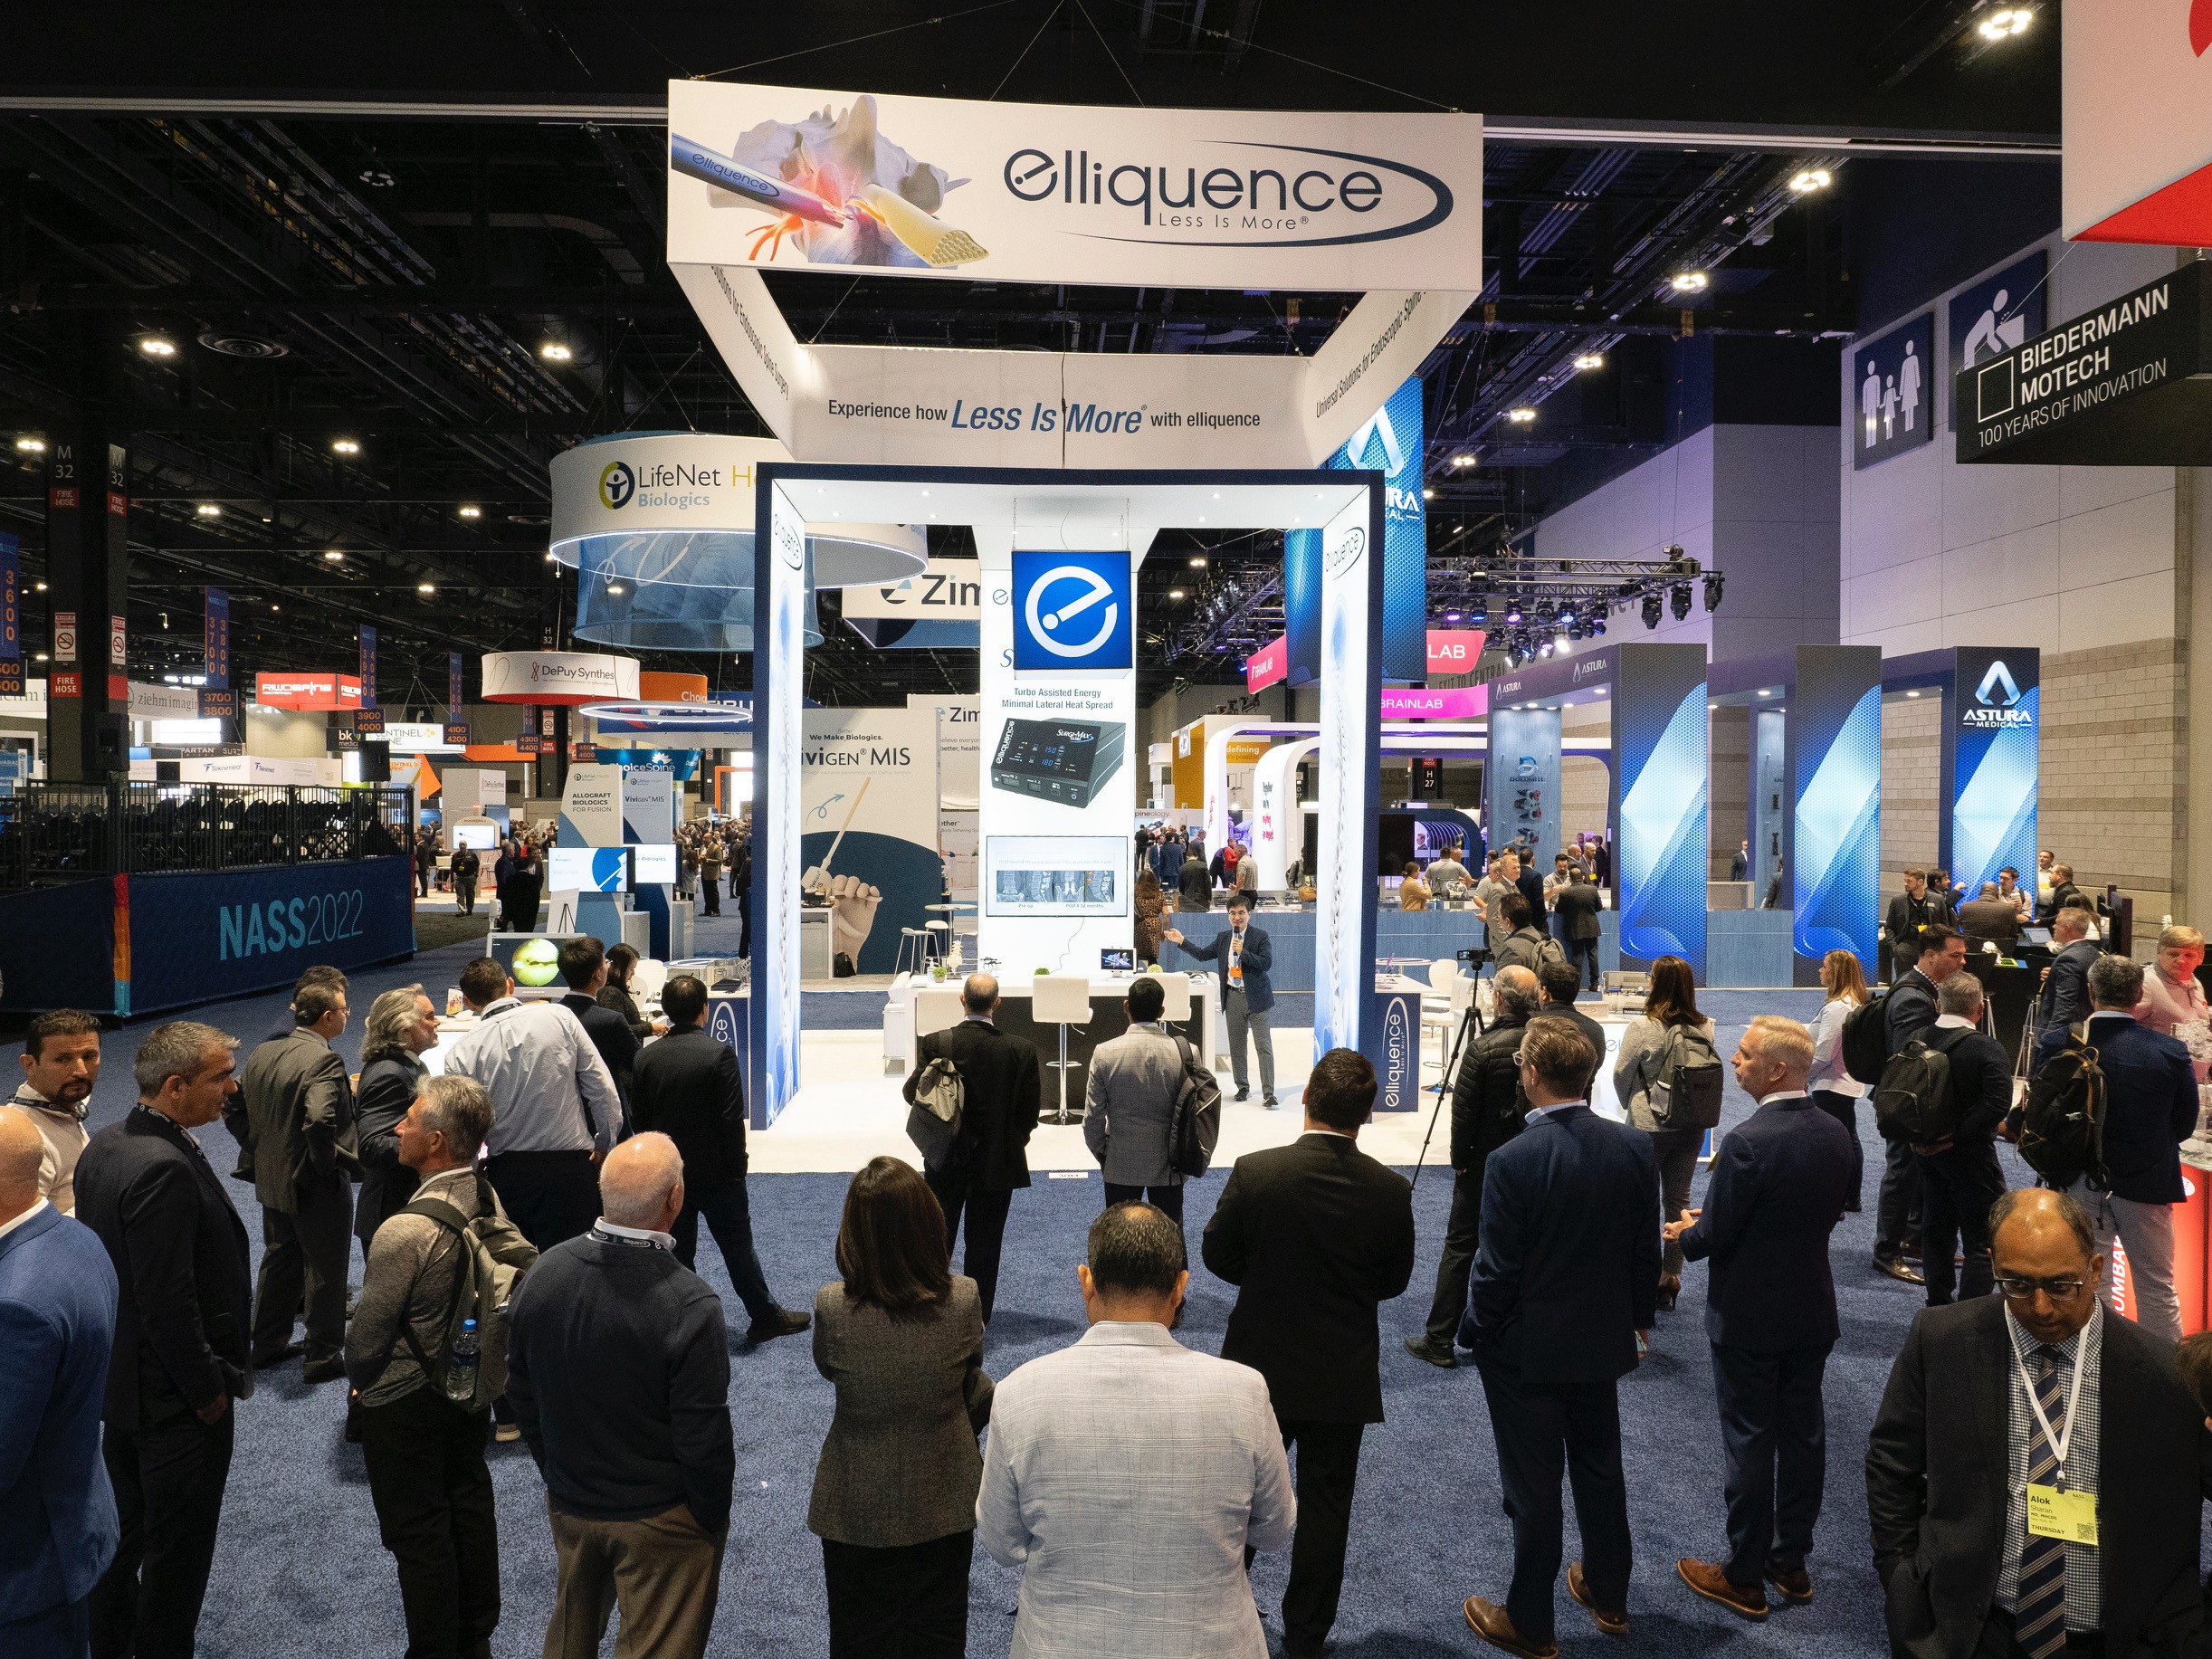 elliquence demonstration at trade show